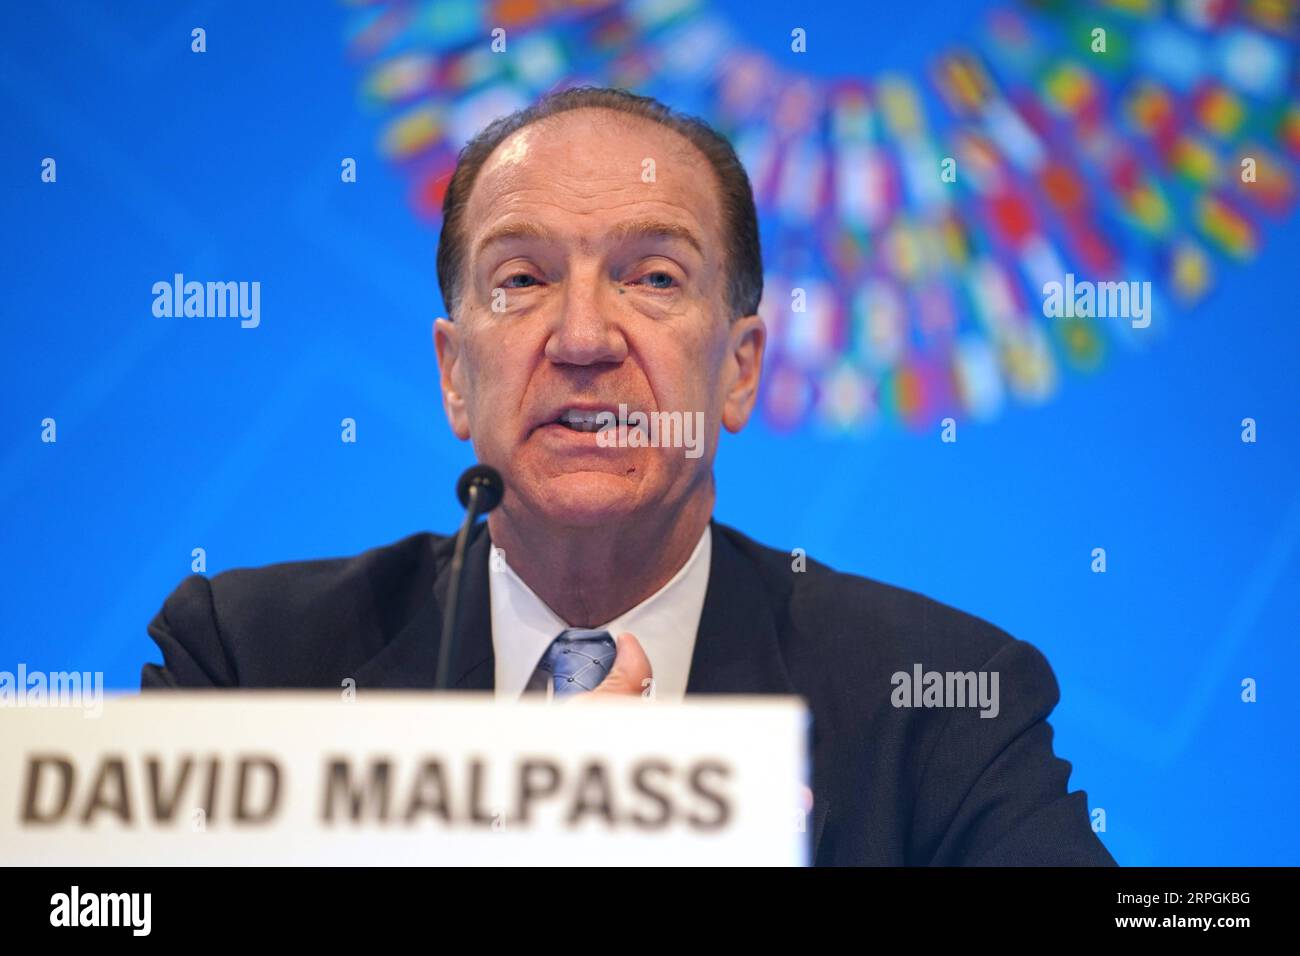 News Bilder des Tages 191018 -- WASHINGTON, Oct. 18, 2019 -- World Bank President David Malpass speaks during a press conference in Washington Oct. 17, 2019. Allowing market to play a bigger role in China s economy in the past few decades has led to a dramatic development that pulled hundreds of millions of people out of poverty, said the World Bank chief on Thursday, which marks the International Day for the Eradication of Poverty.  U.S.-WASHINGTON-DAVID MALPASS-WORLD BANK-PRESS CONFERENCE LiuxJie PUBLICATIONxNOTxINxCHN Stock Photo